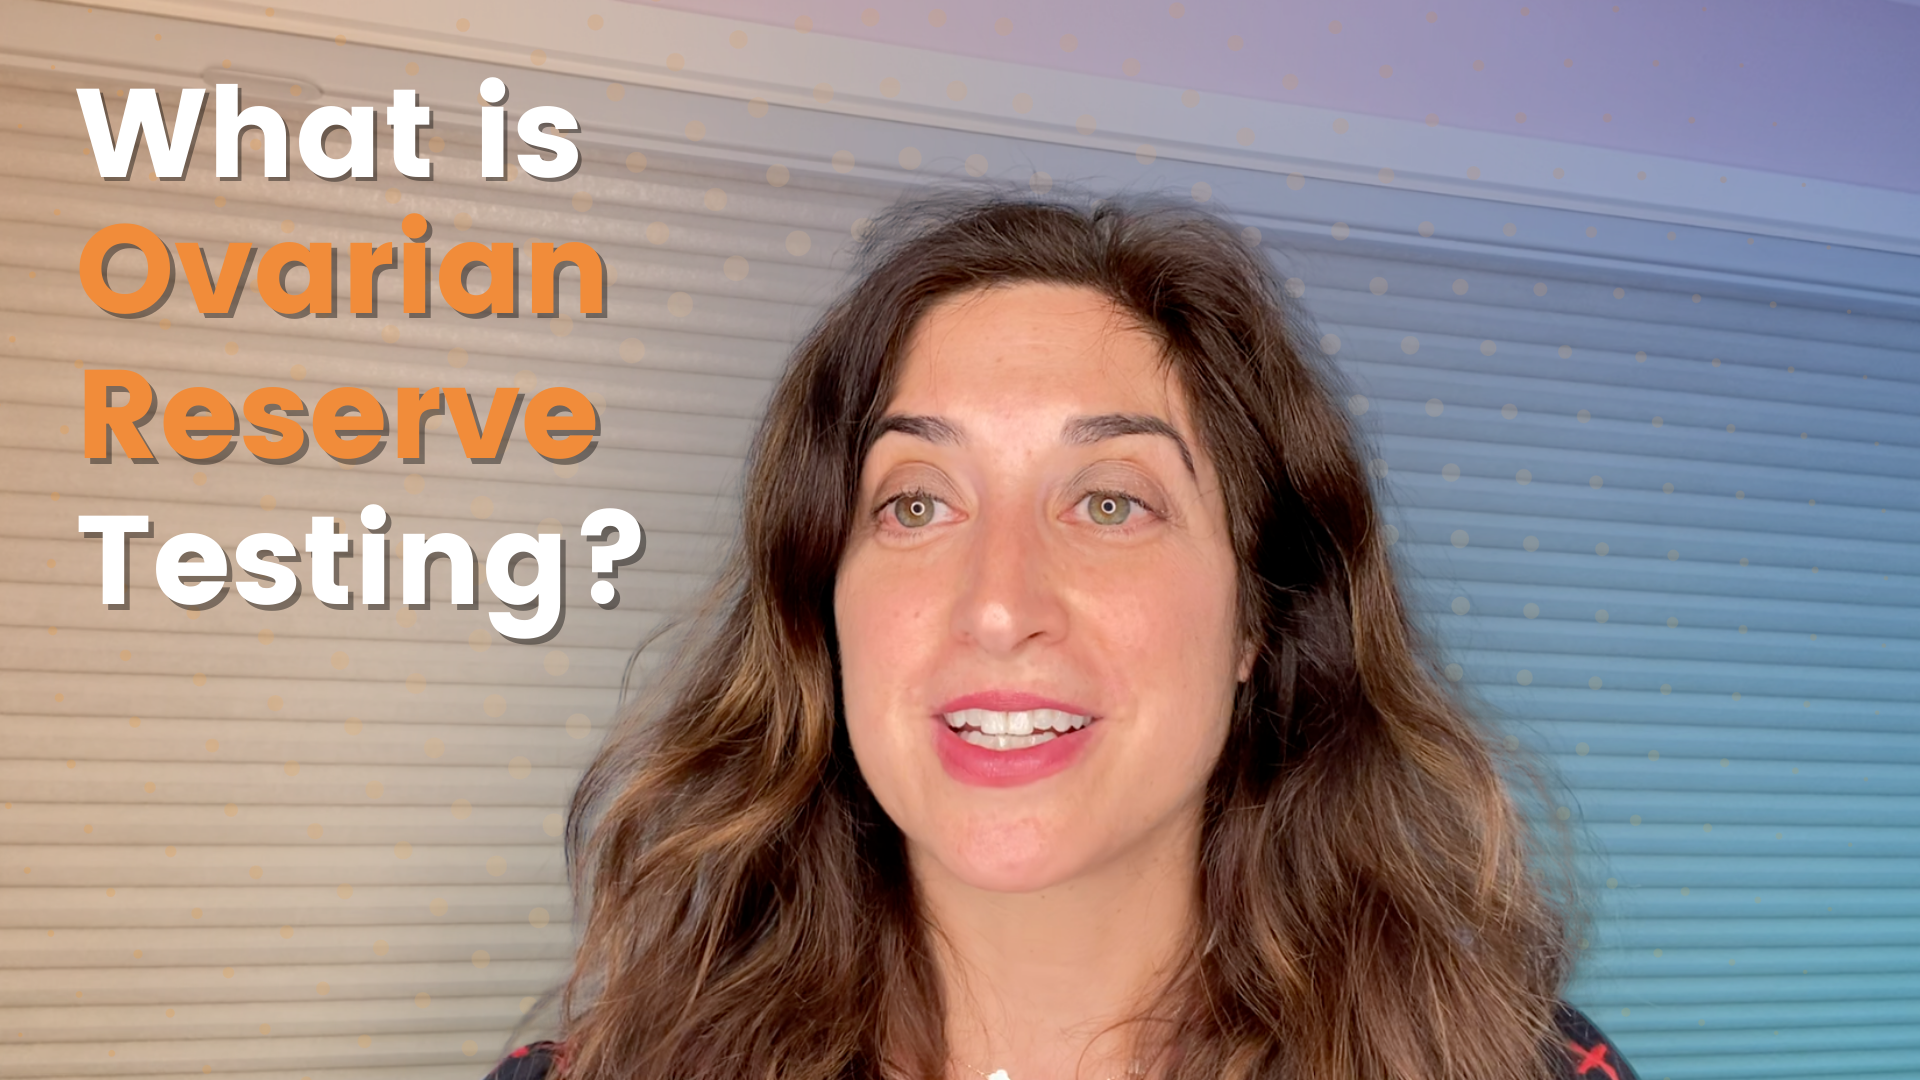 What is ovarian reserve testing